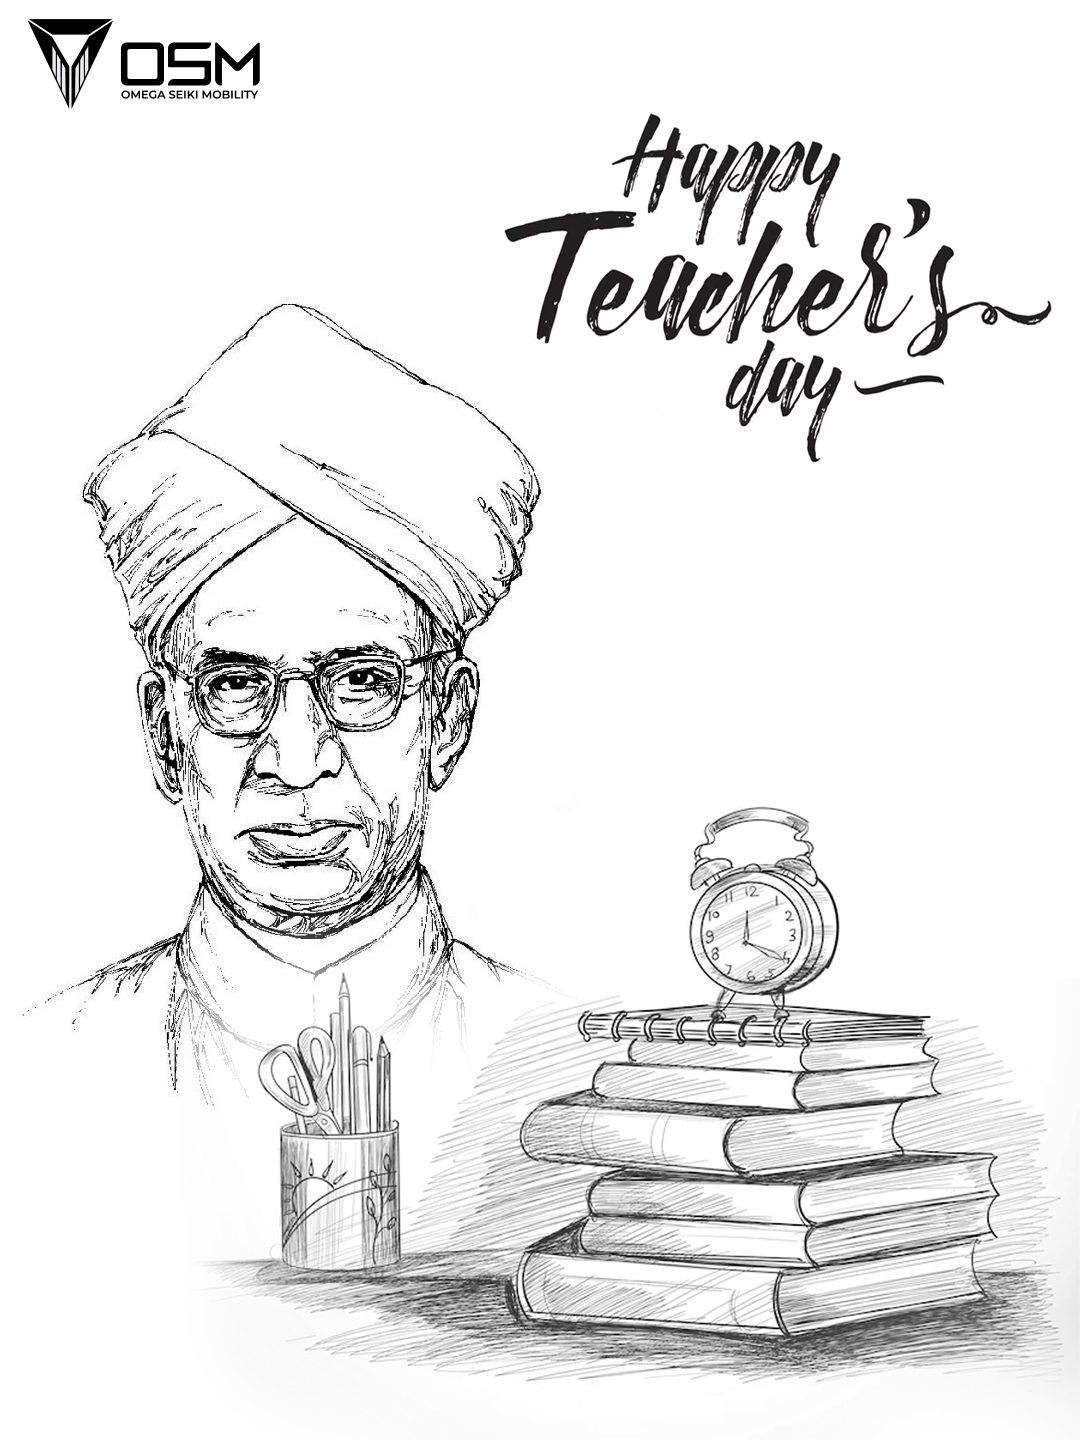 September 5th, is celebrated as Teacher's day in India